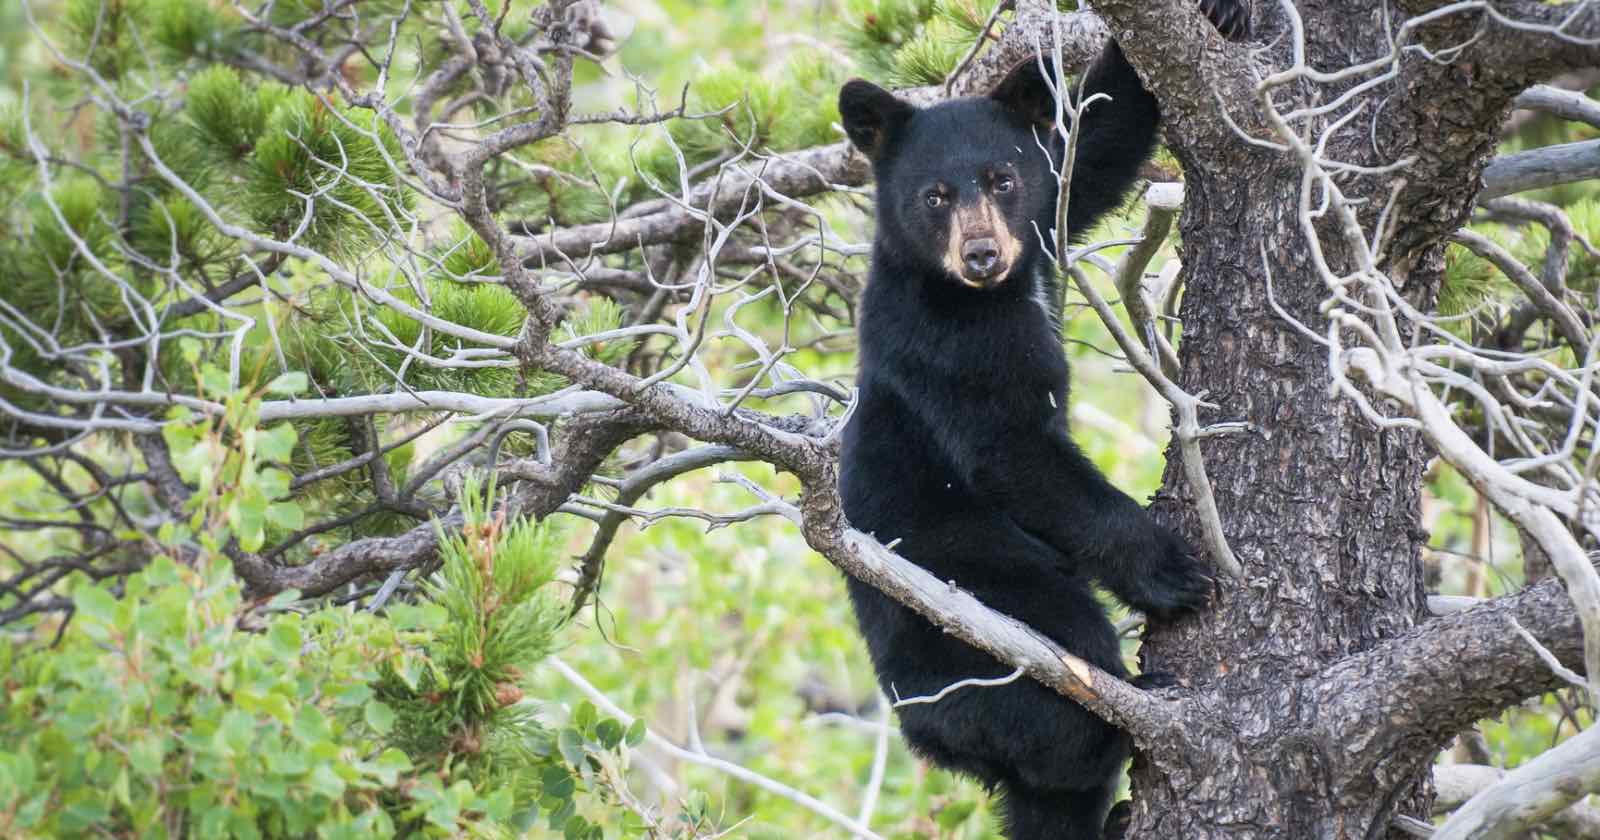 Group of Six People Rip Bear Cubs Out of Tree to Take Selfies With Them